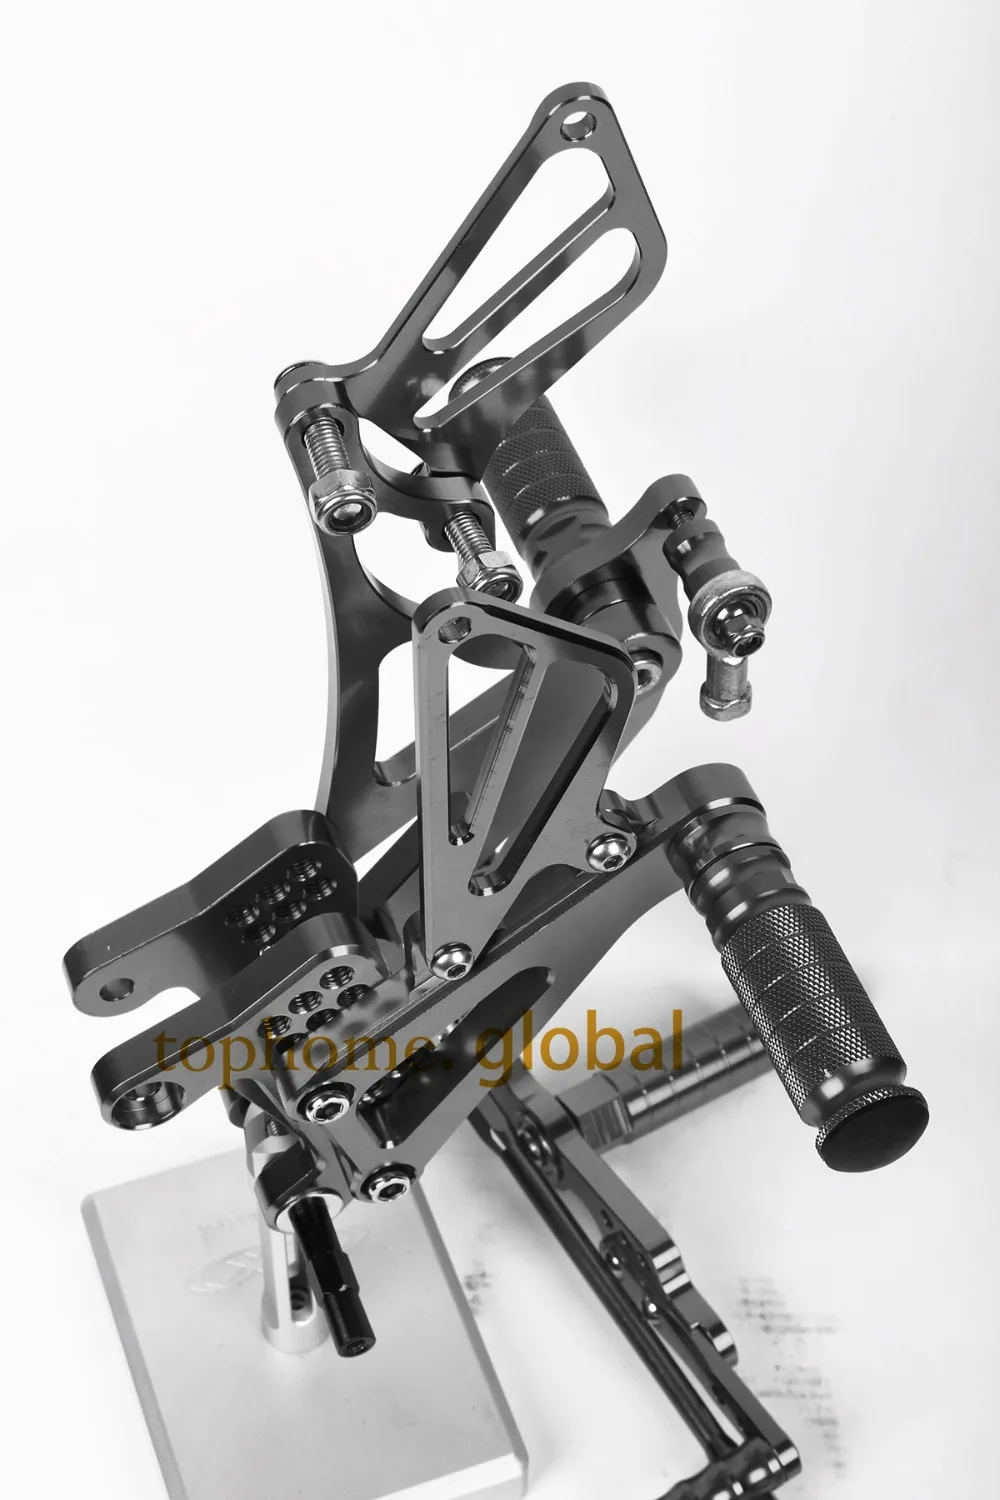 For Yamaha YZF R1 2007 2008 CNC Rearset Footrest Footpegs Foot Pegs Rear Set